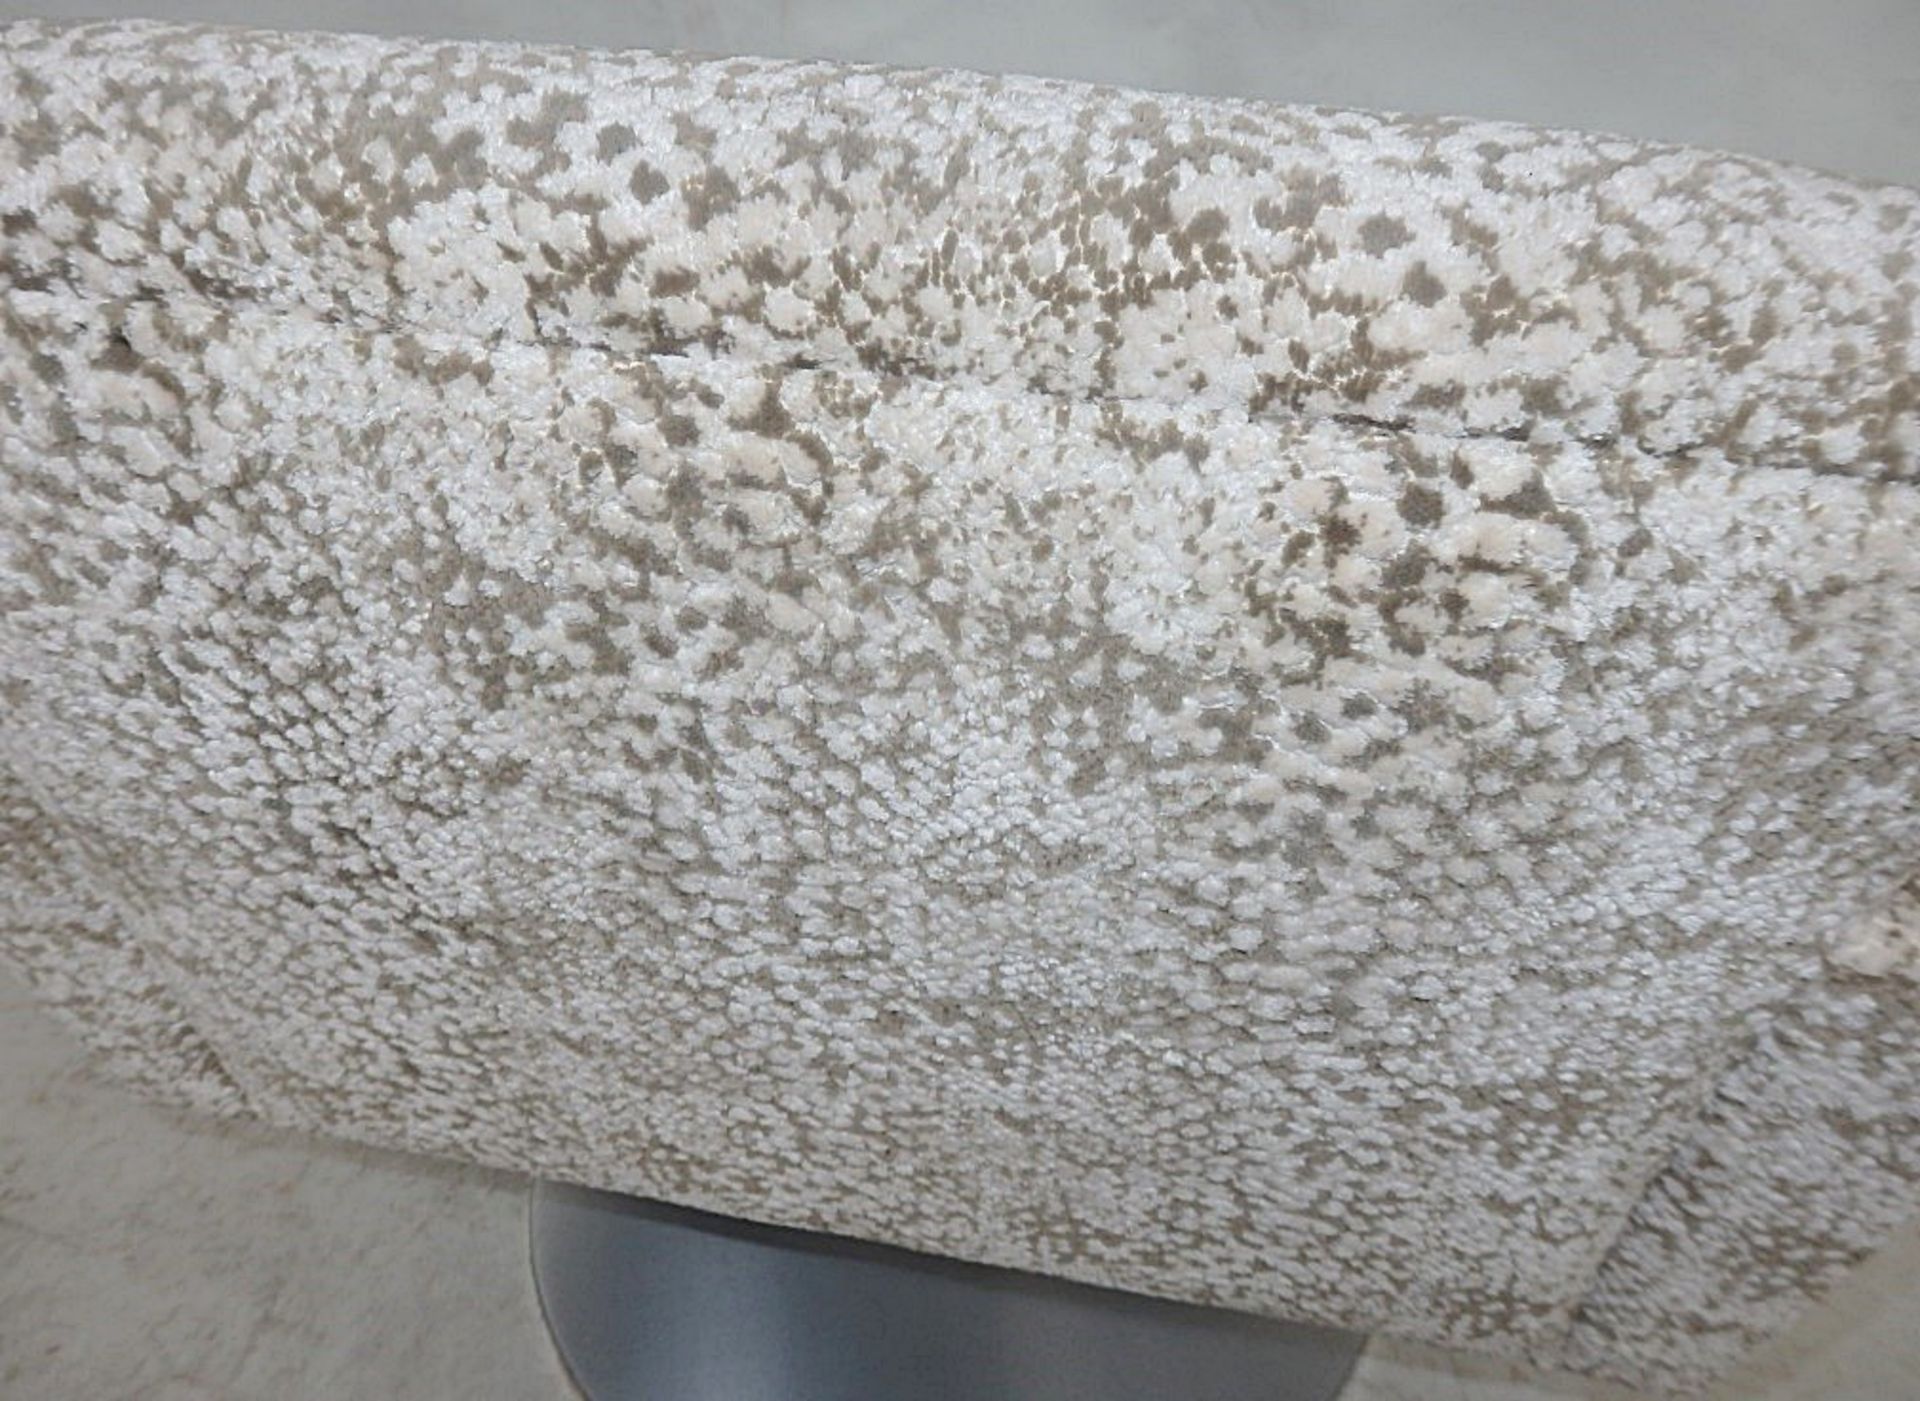 1 x Small Bespoke Swivel Chair - Upholstered In A Rich Mottled Chenille - Dimensions: W x H x D cm - - Image 5 of 5